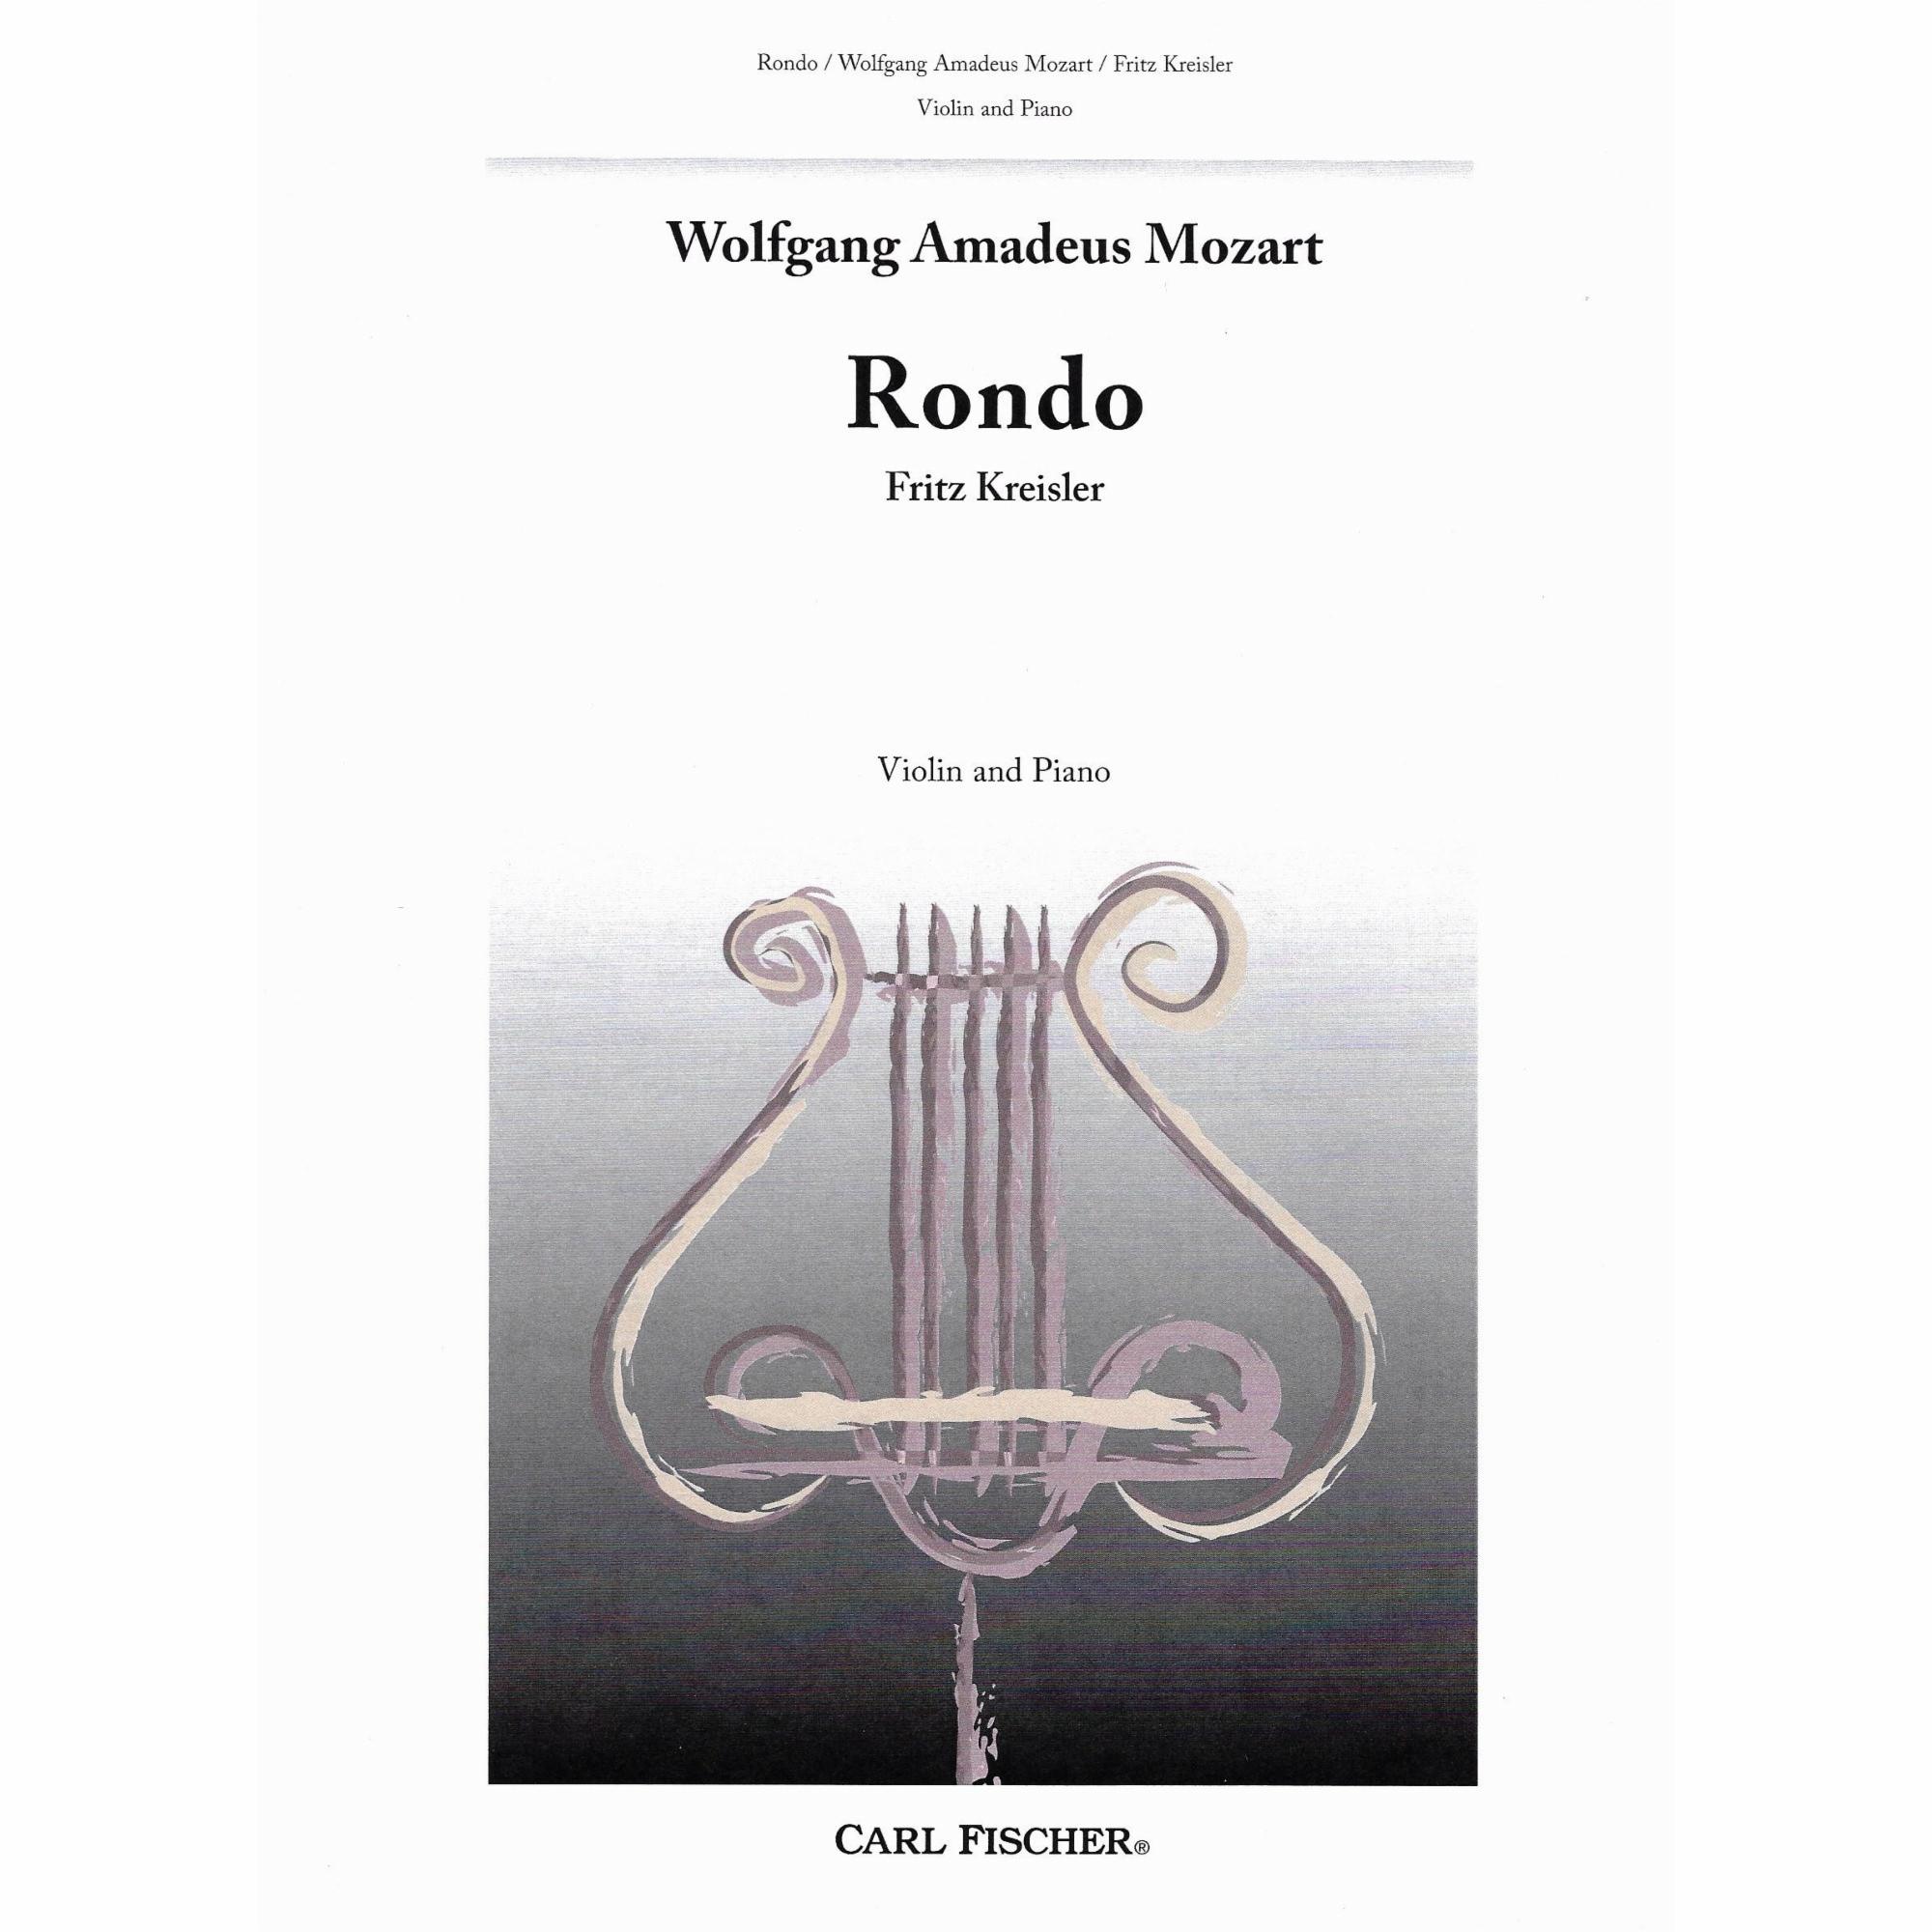 Mozart -- Rondo from The Haffner Serenade, K. 250 for Violin and Piano